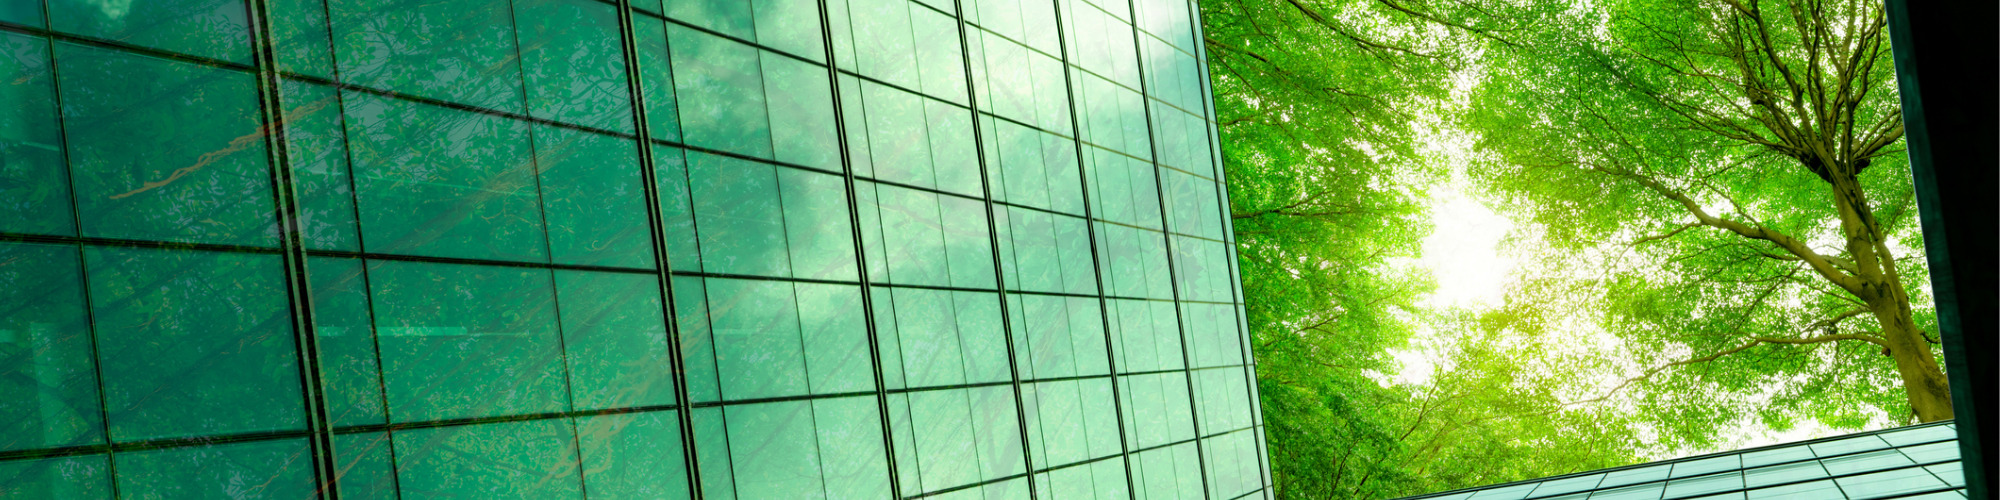 The Corporate Sustainability Reporting Directive (CSRD) - Keep Up with the Latest Requirements